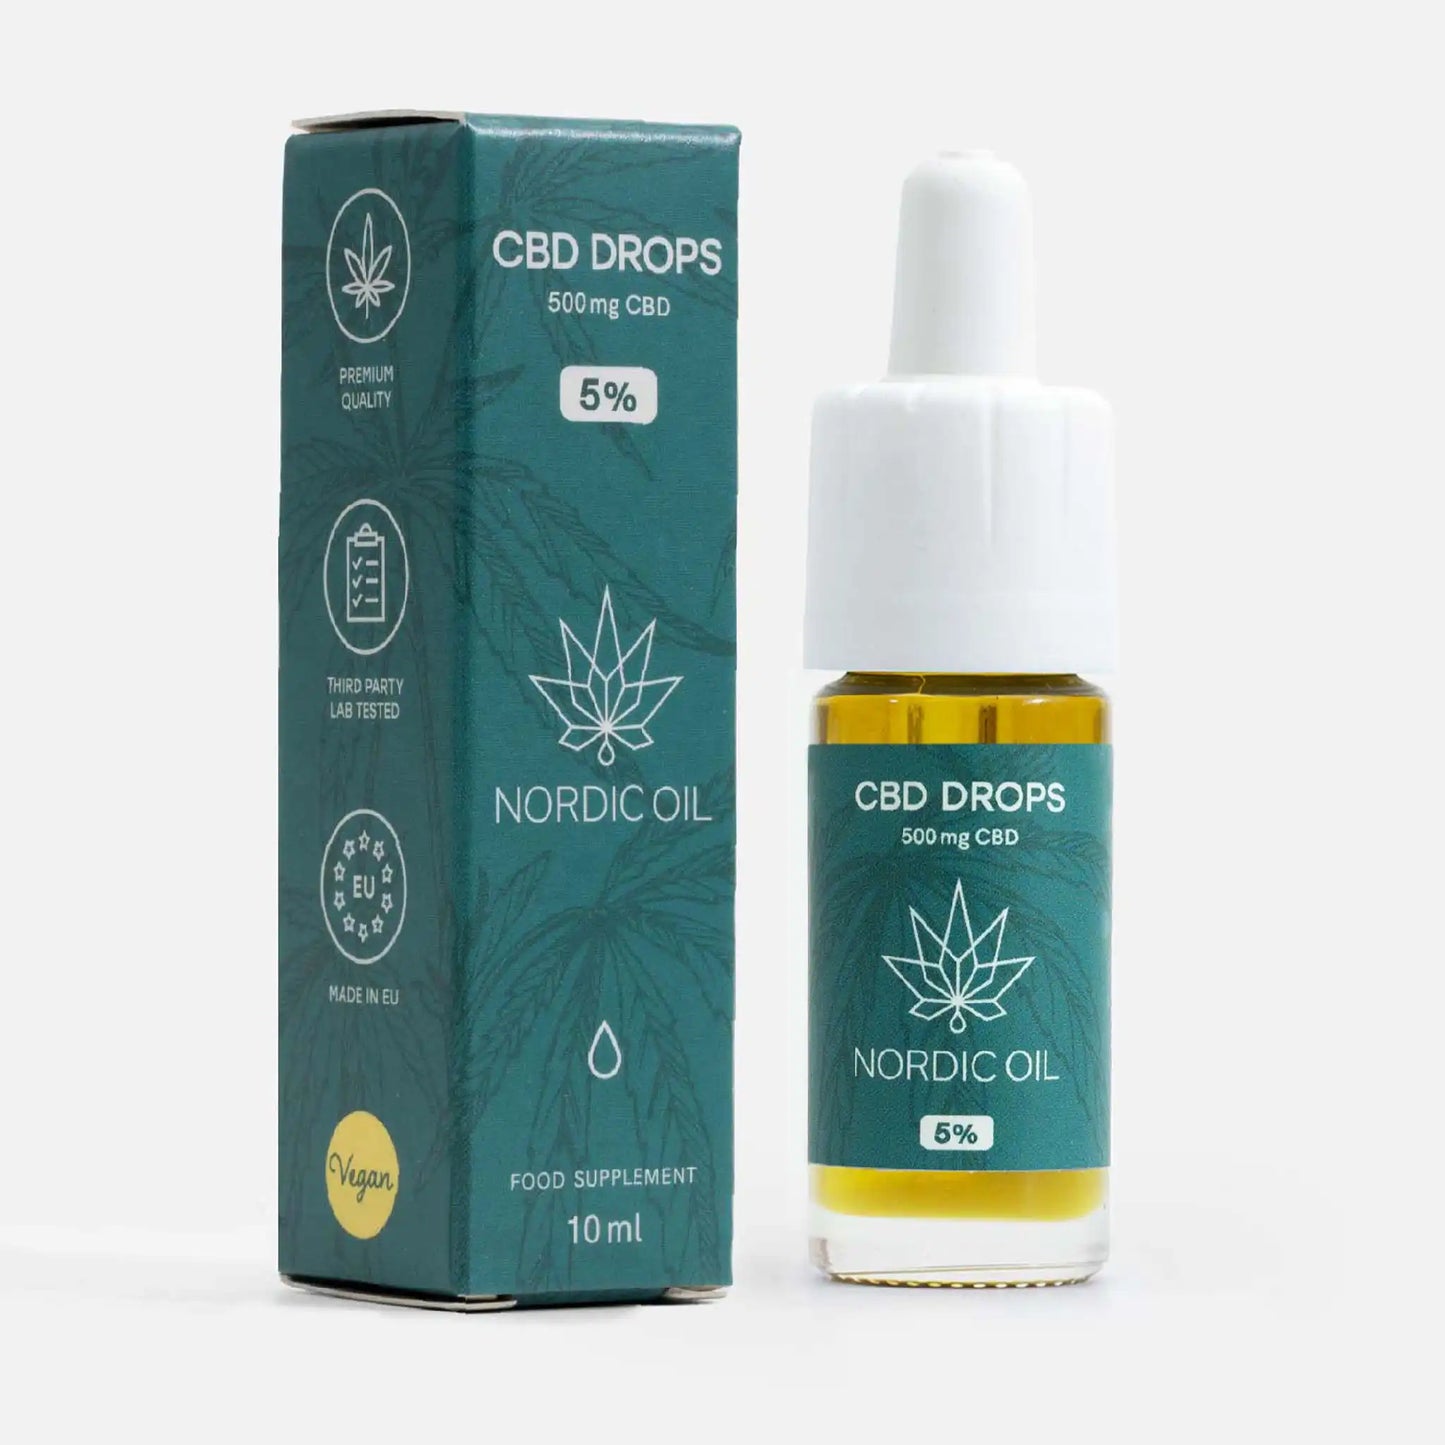 cbd oil - packaging and product